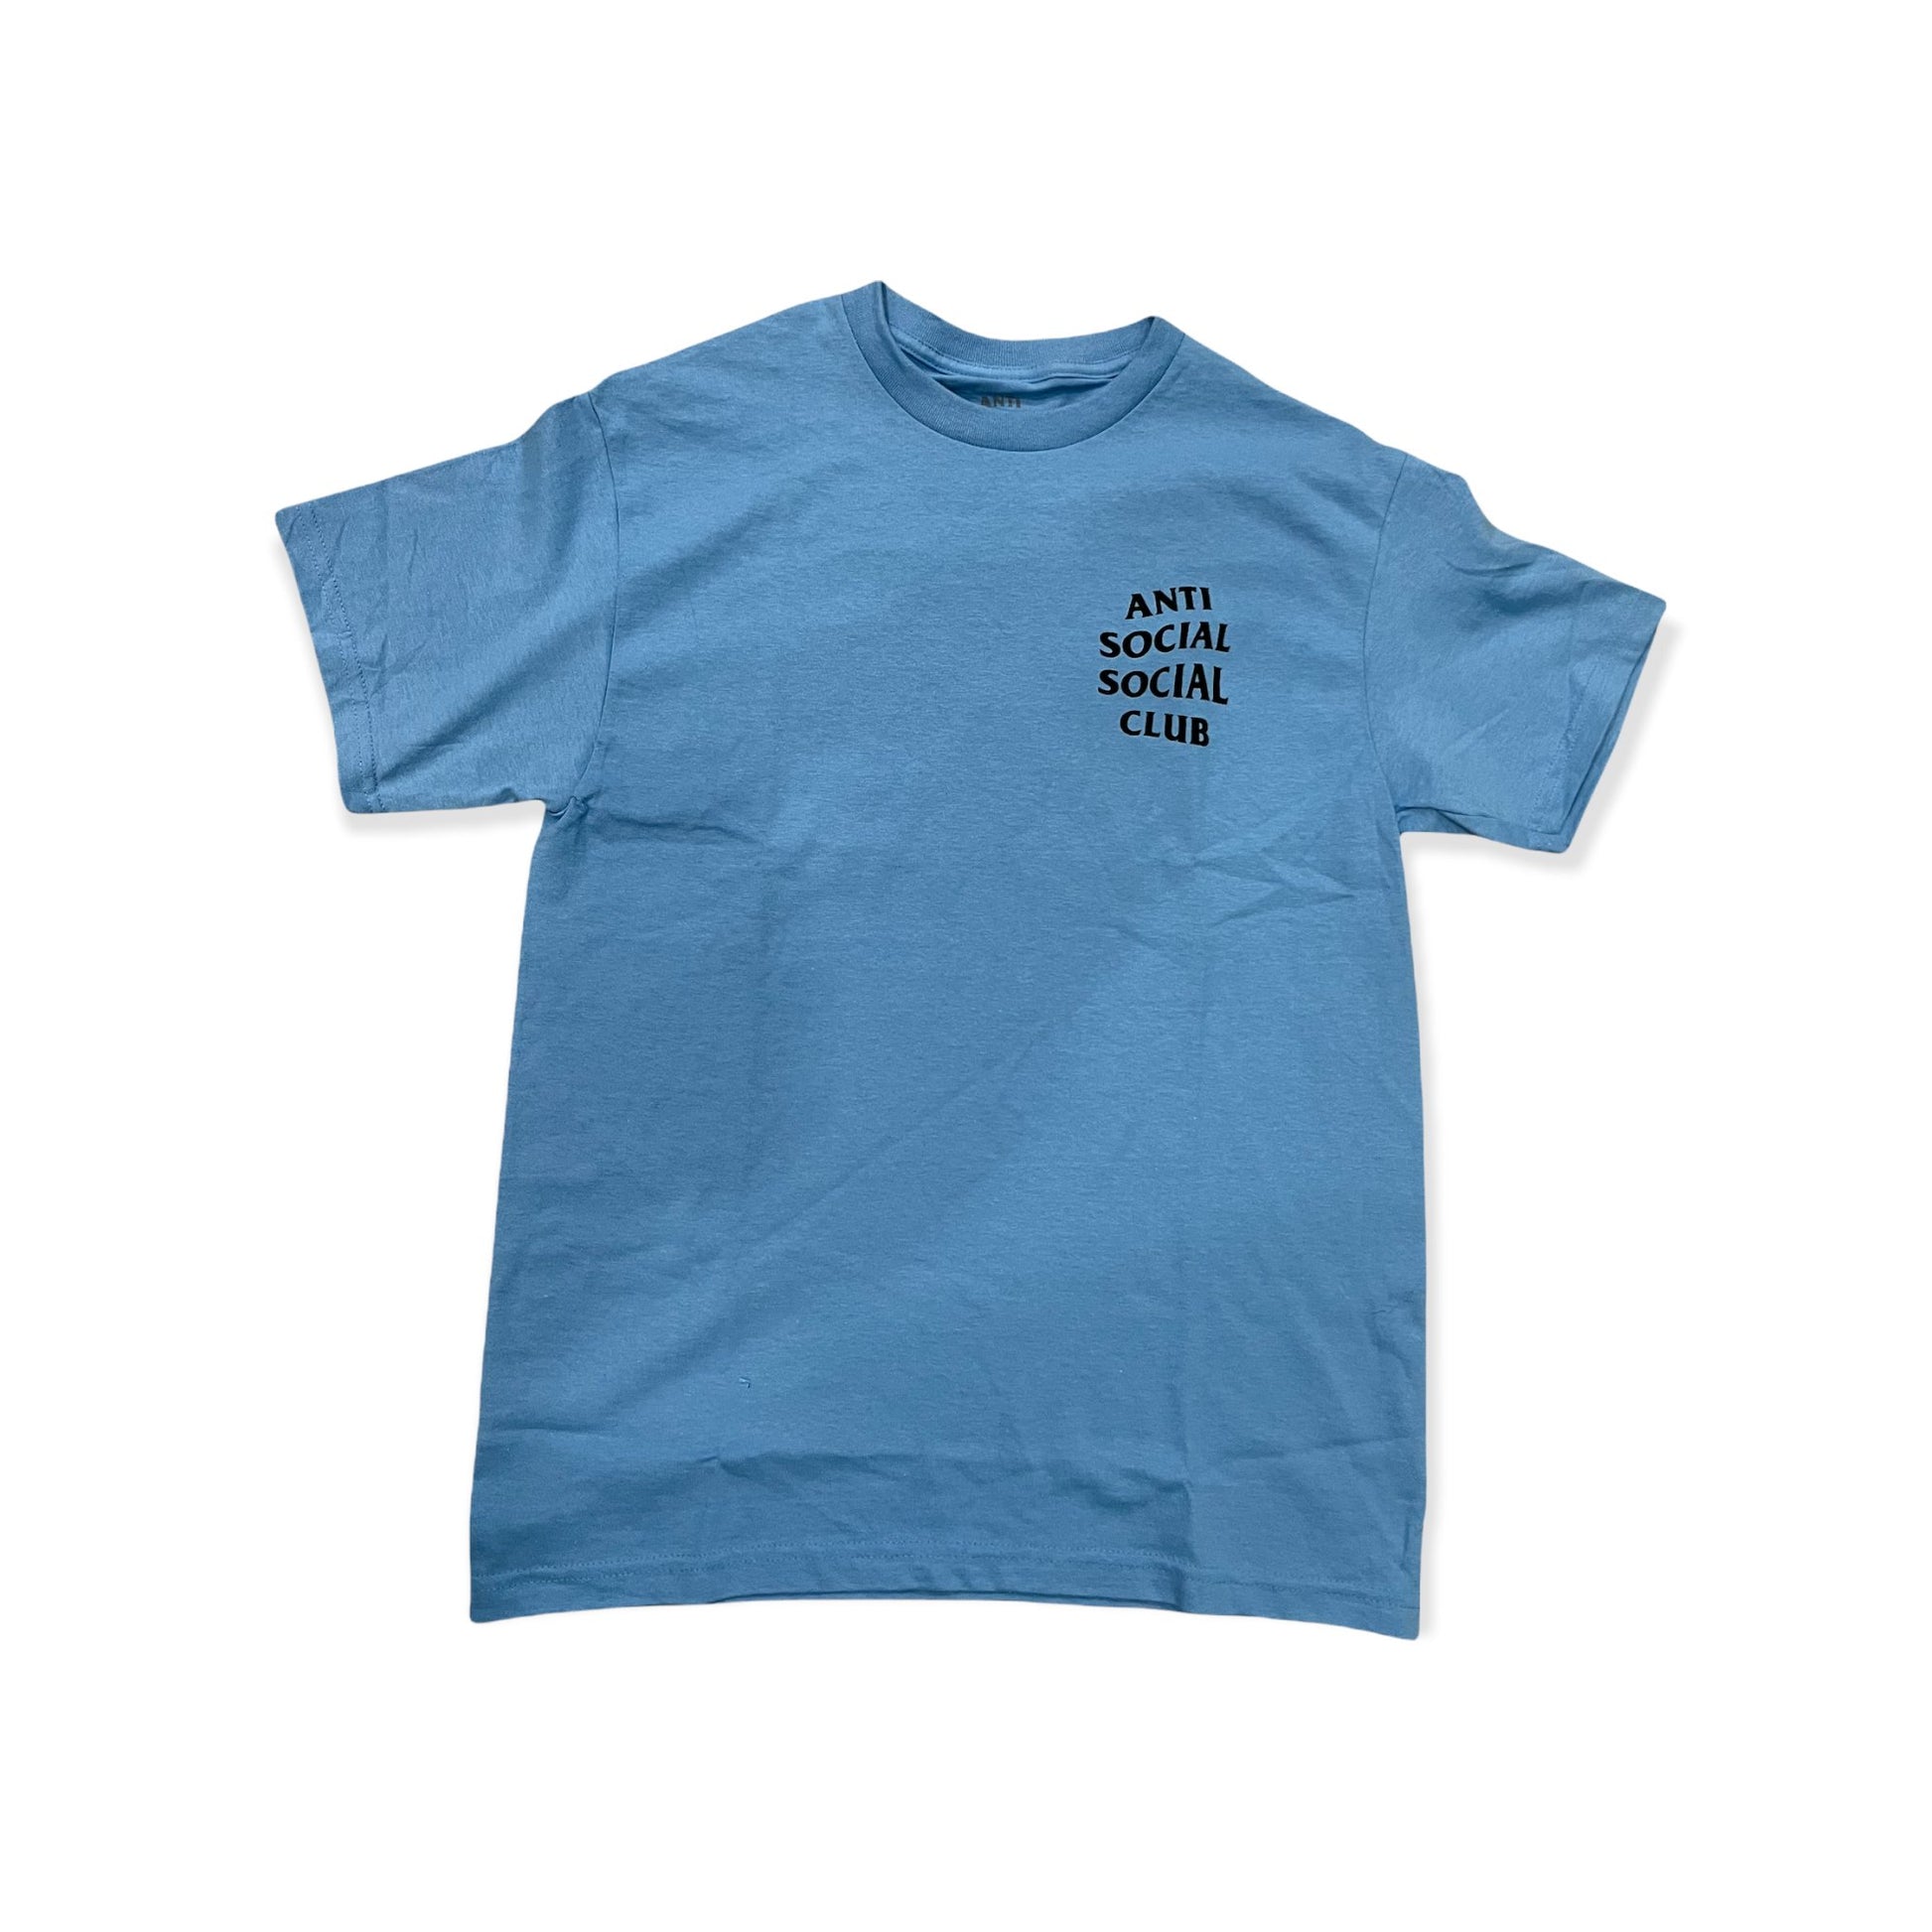 may benefit the most from a cushioned shoe Logo Tee Baby Blue / Black - Sneakersbe Sneakers Sale Online